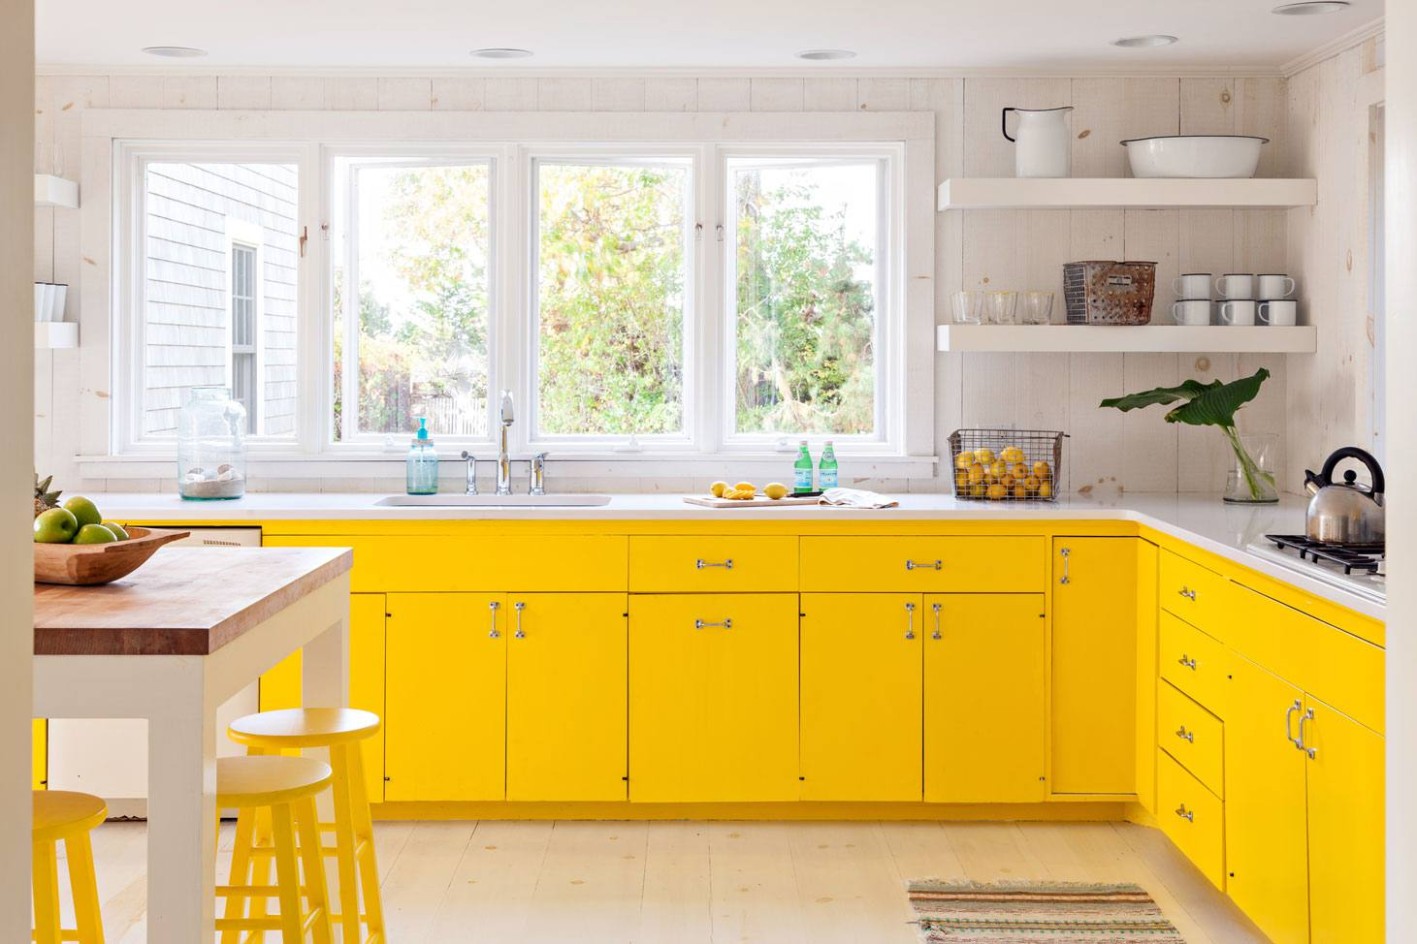 7 Colorful Kitchen Ideas to Brighten Your Cooking Space - funky kitchen ideas